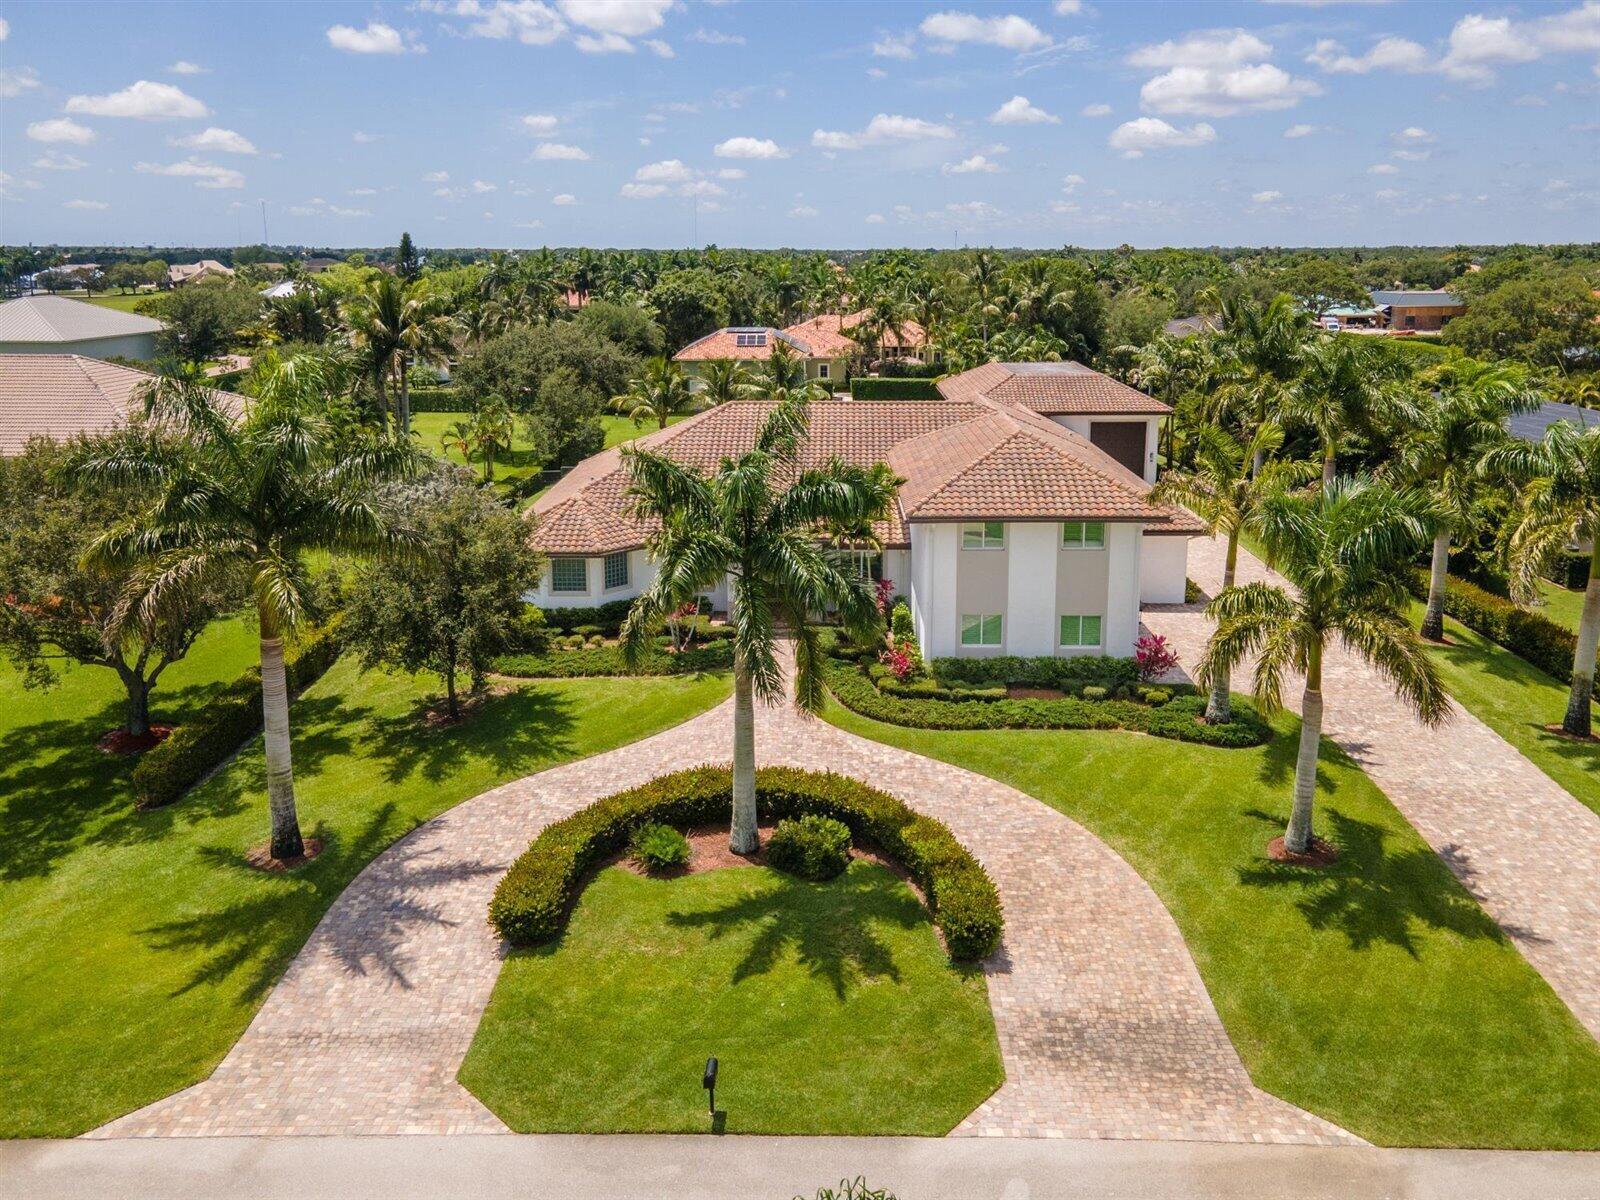 south florida home on acre of land